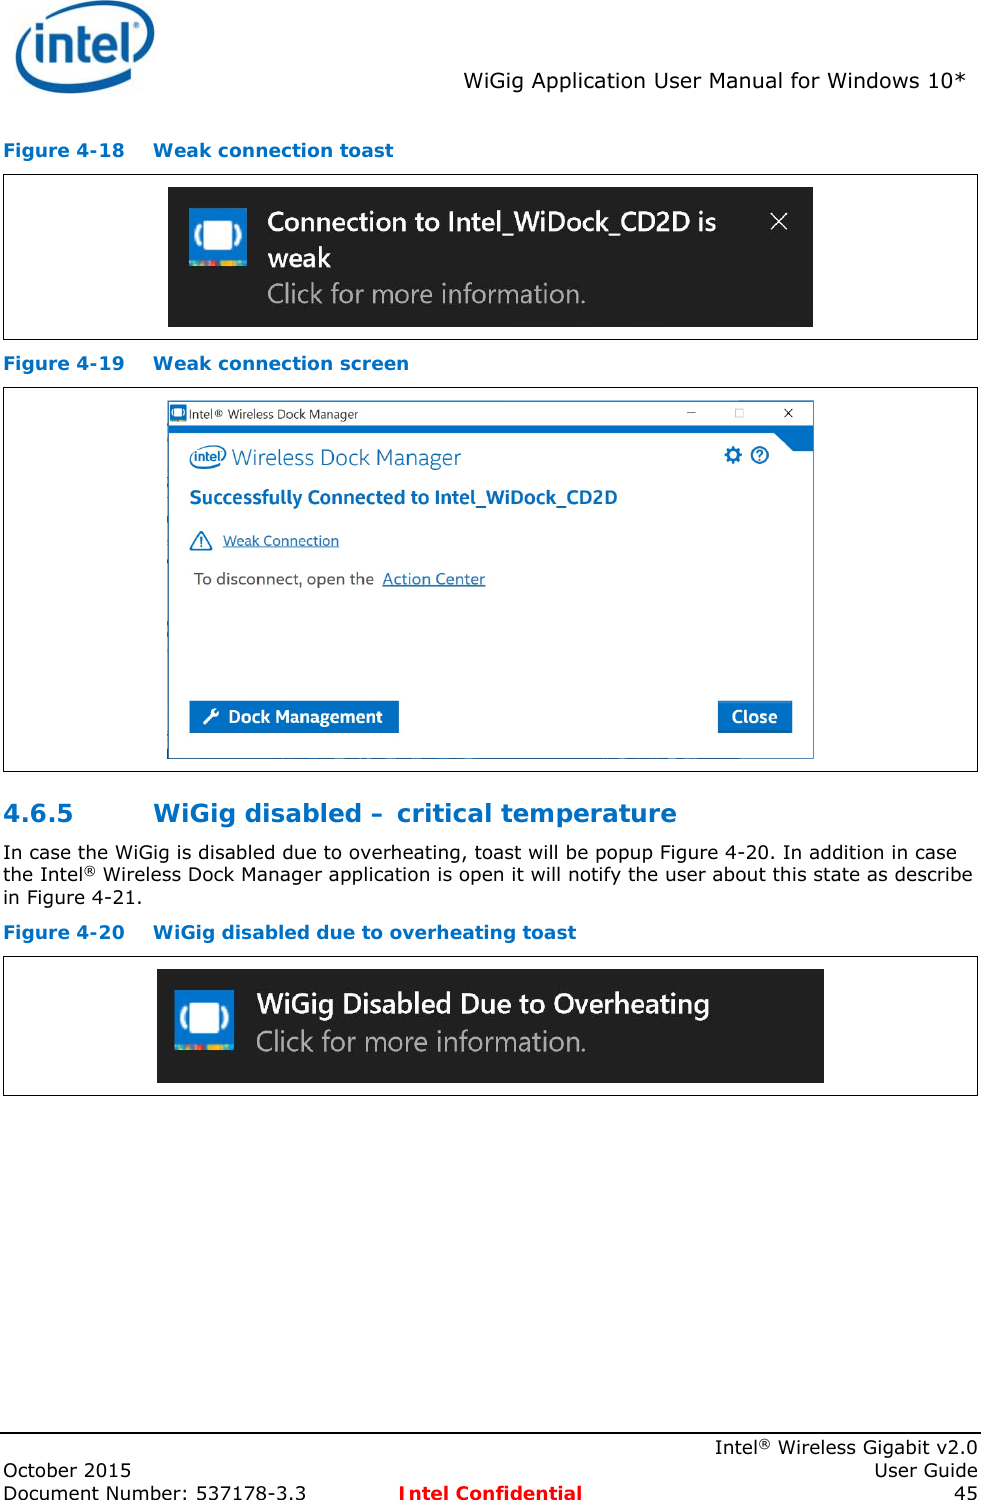  WiGig Application User Manual for Windows 10*    Intel® Wireless Gigabit v2.0 October 2015    User Guide Document Number: 537178-3.3  Intel Confidential 45 Figure 4-18  Weak connection toast  Figure 4-19  Weak connection screen  4.6.5 WiGig disabled – critical temperature In case the WiGig is disabled due to overheating, toast will be popup Figure 4-20. In addition in case the Intel® Wireless Dock Manager application is open it will notify the user about this state as describe in Figure 4-21. Figure 4-20  WiGig disabled due to overheating toast  